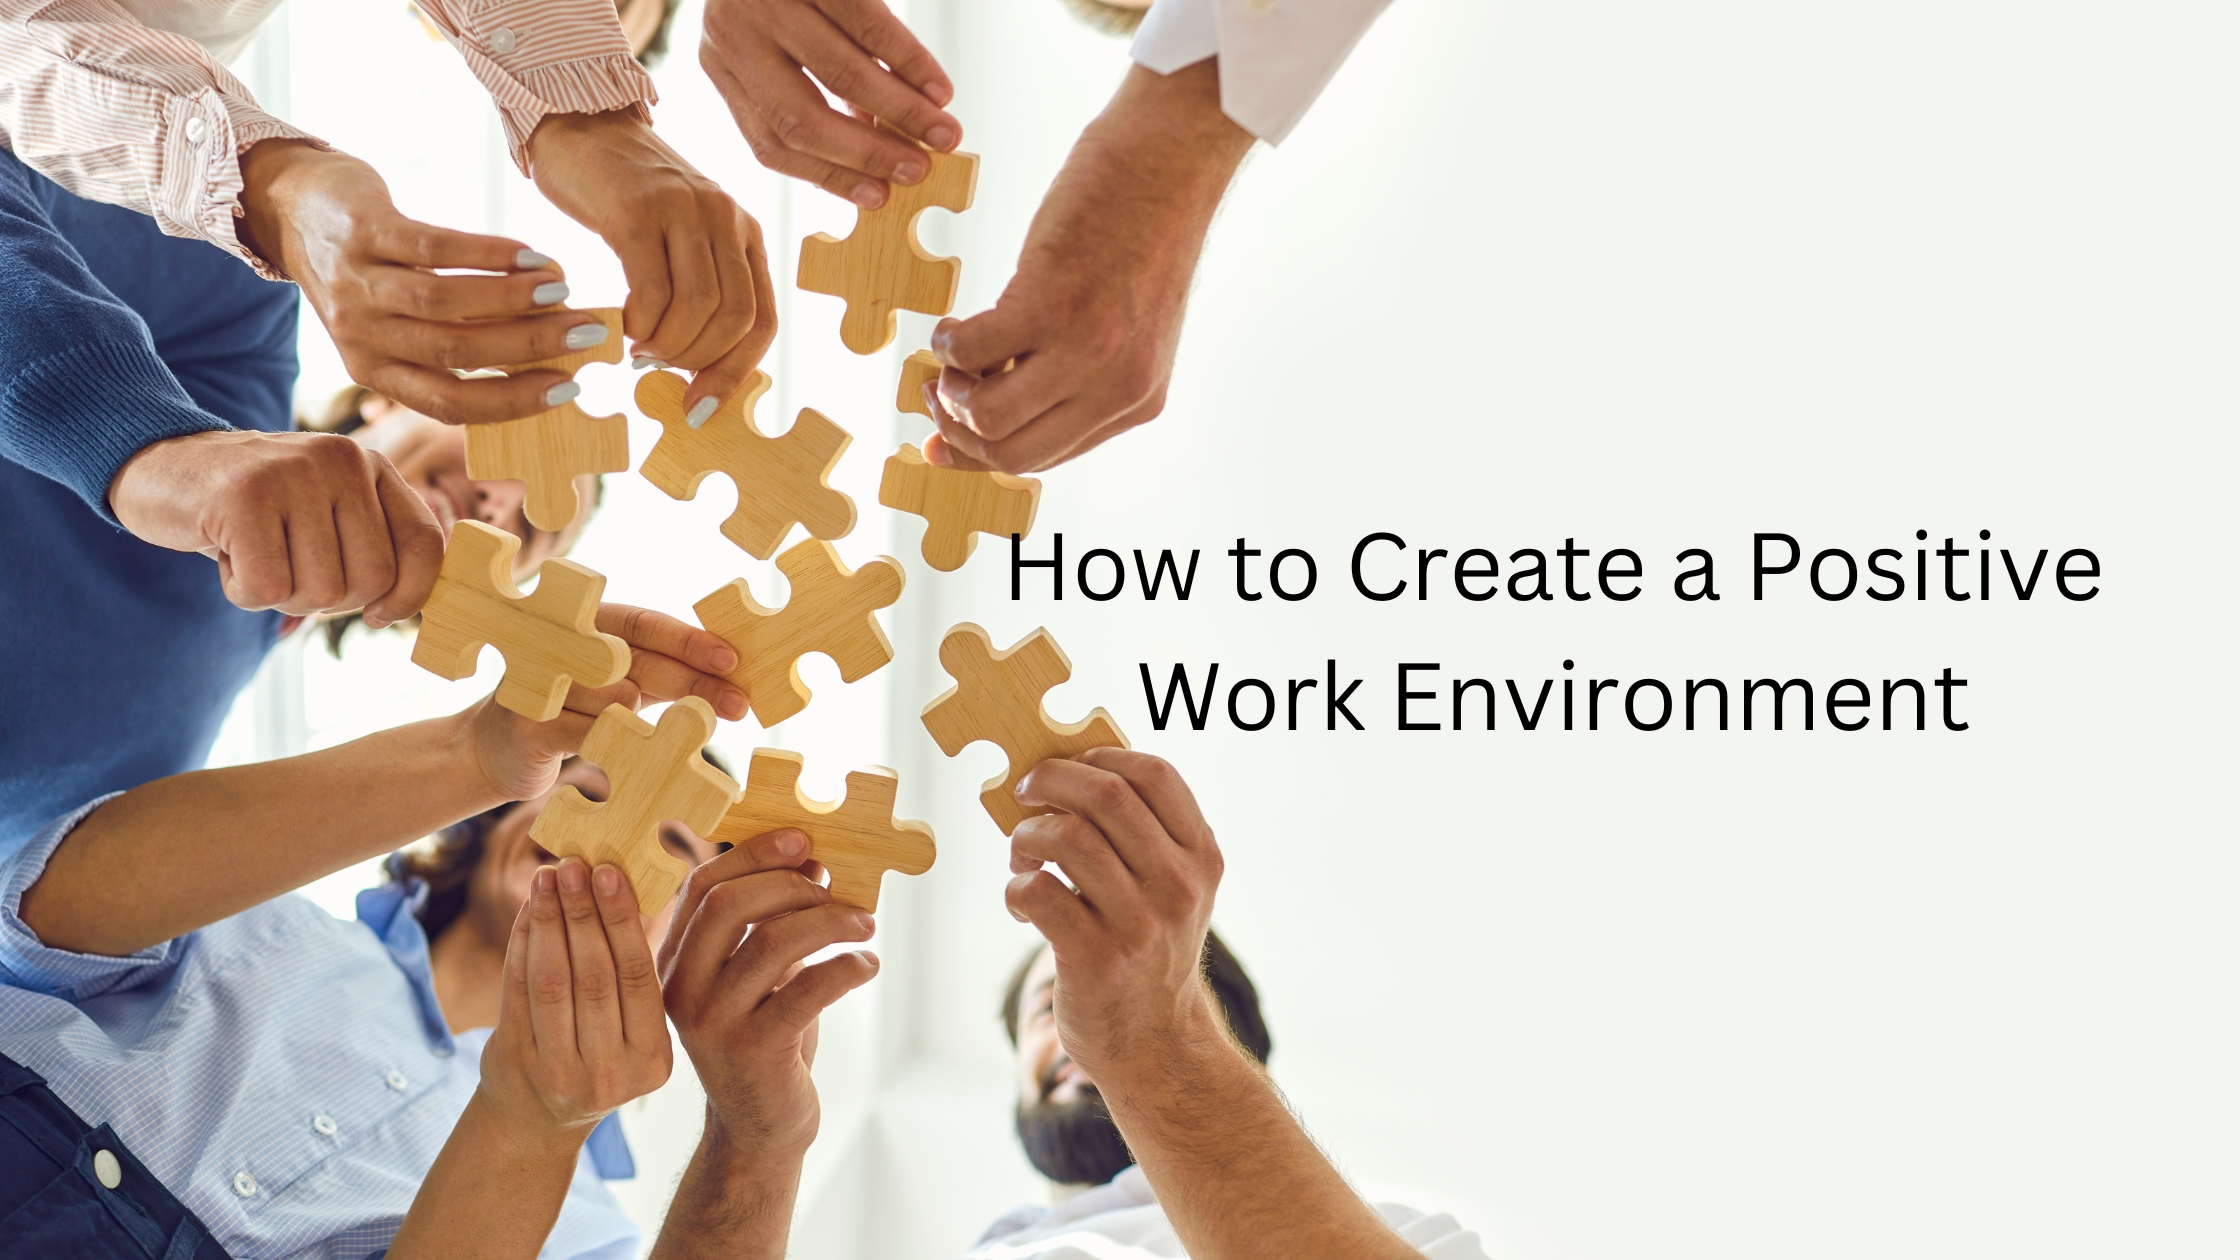 How to create a positive work environment